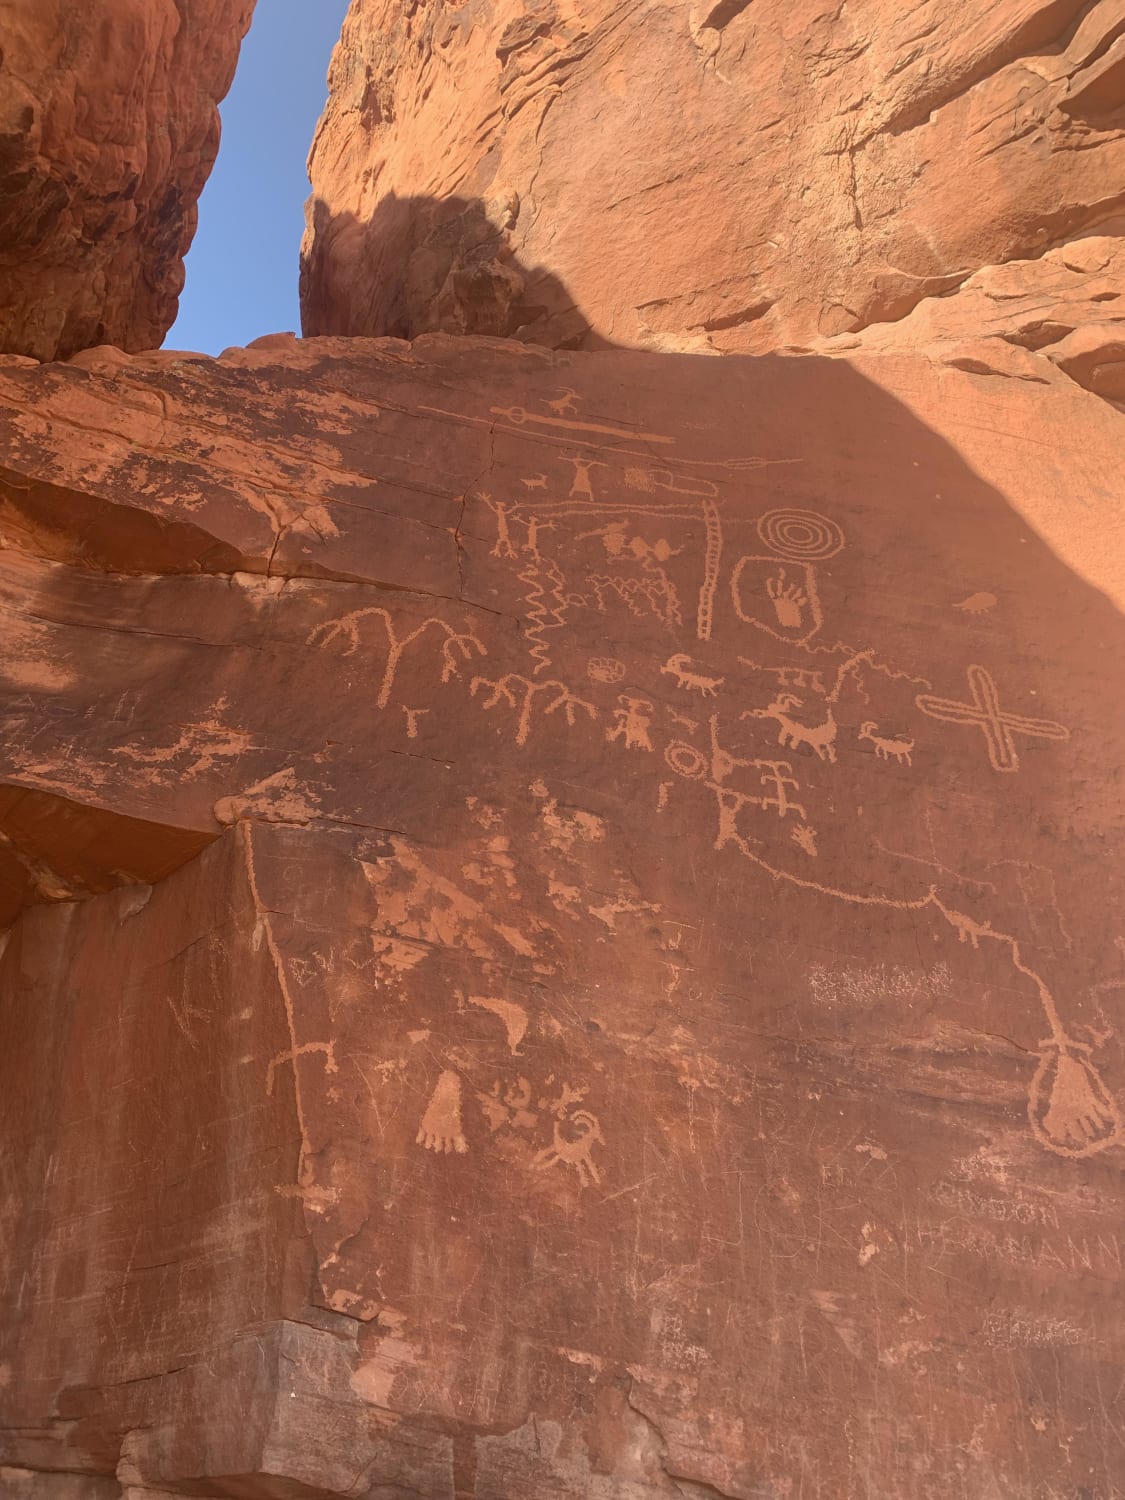 ITAP of Petroglyphs at Red Rock Canyon outside of Las Vegas